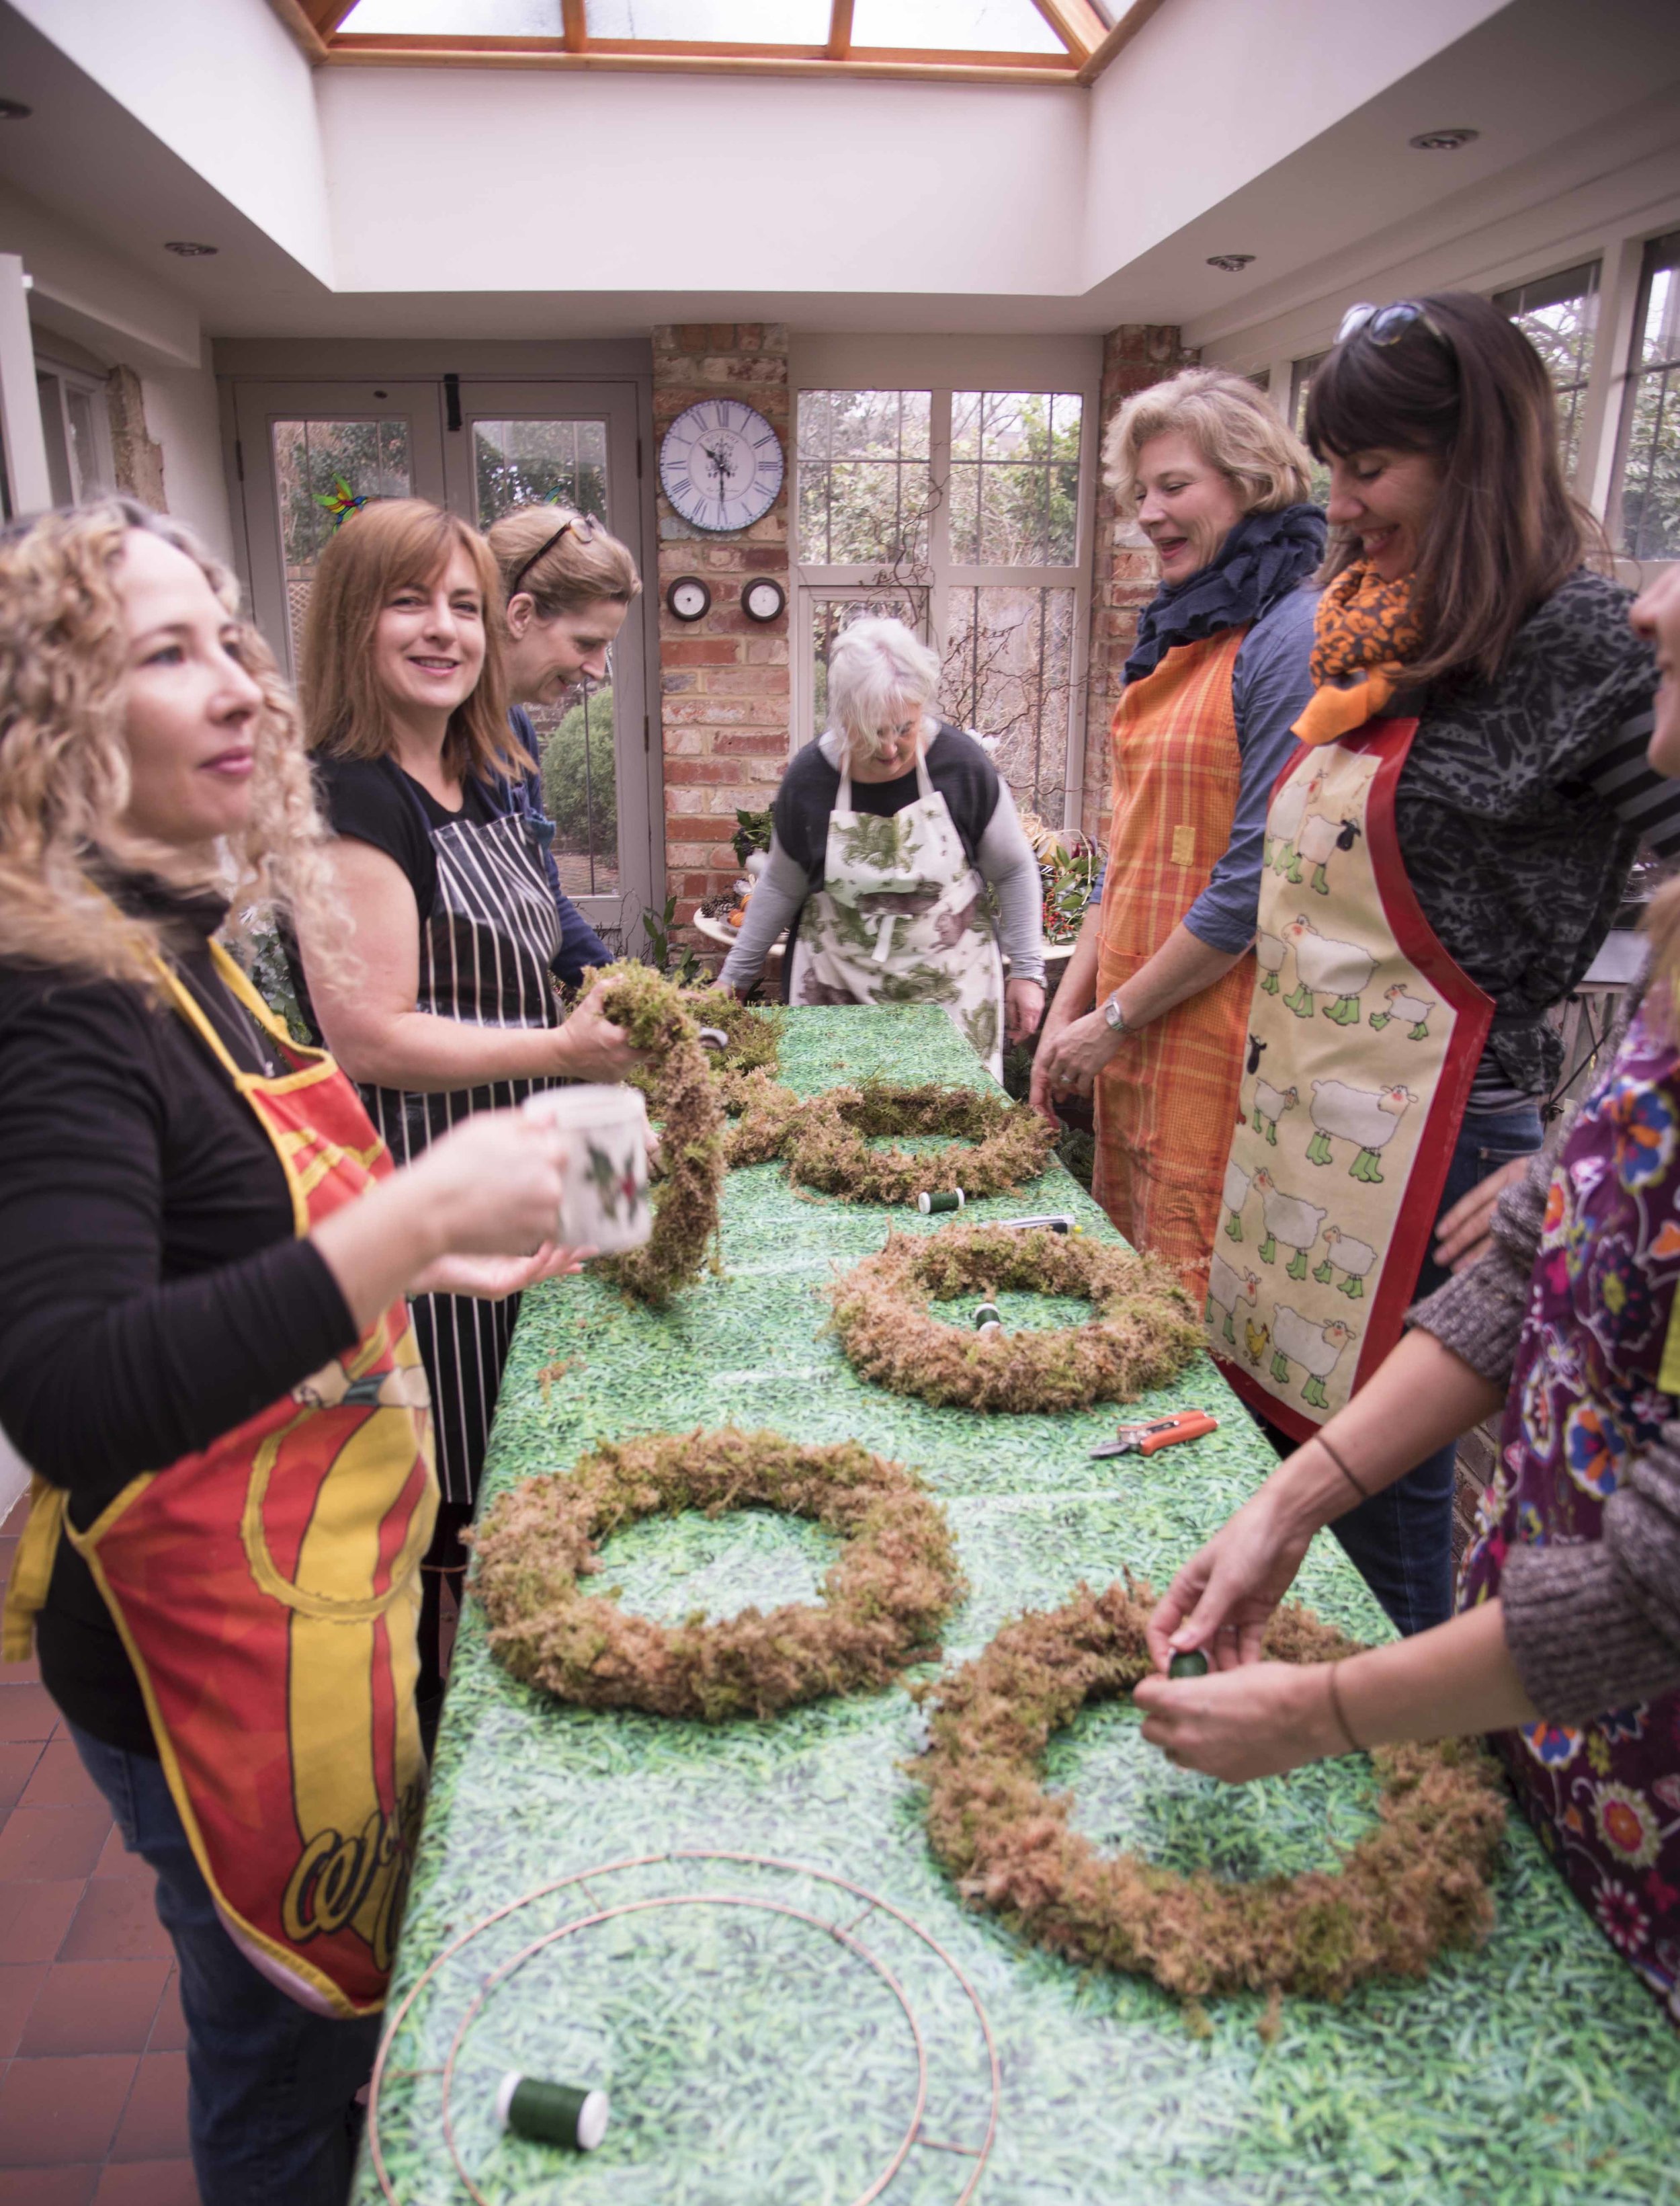 Copy of Wreath making workshop run by Darling Buds of Sussex